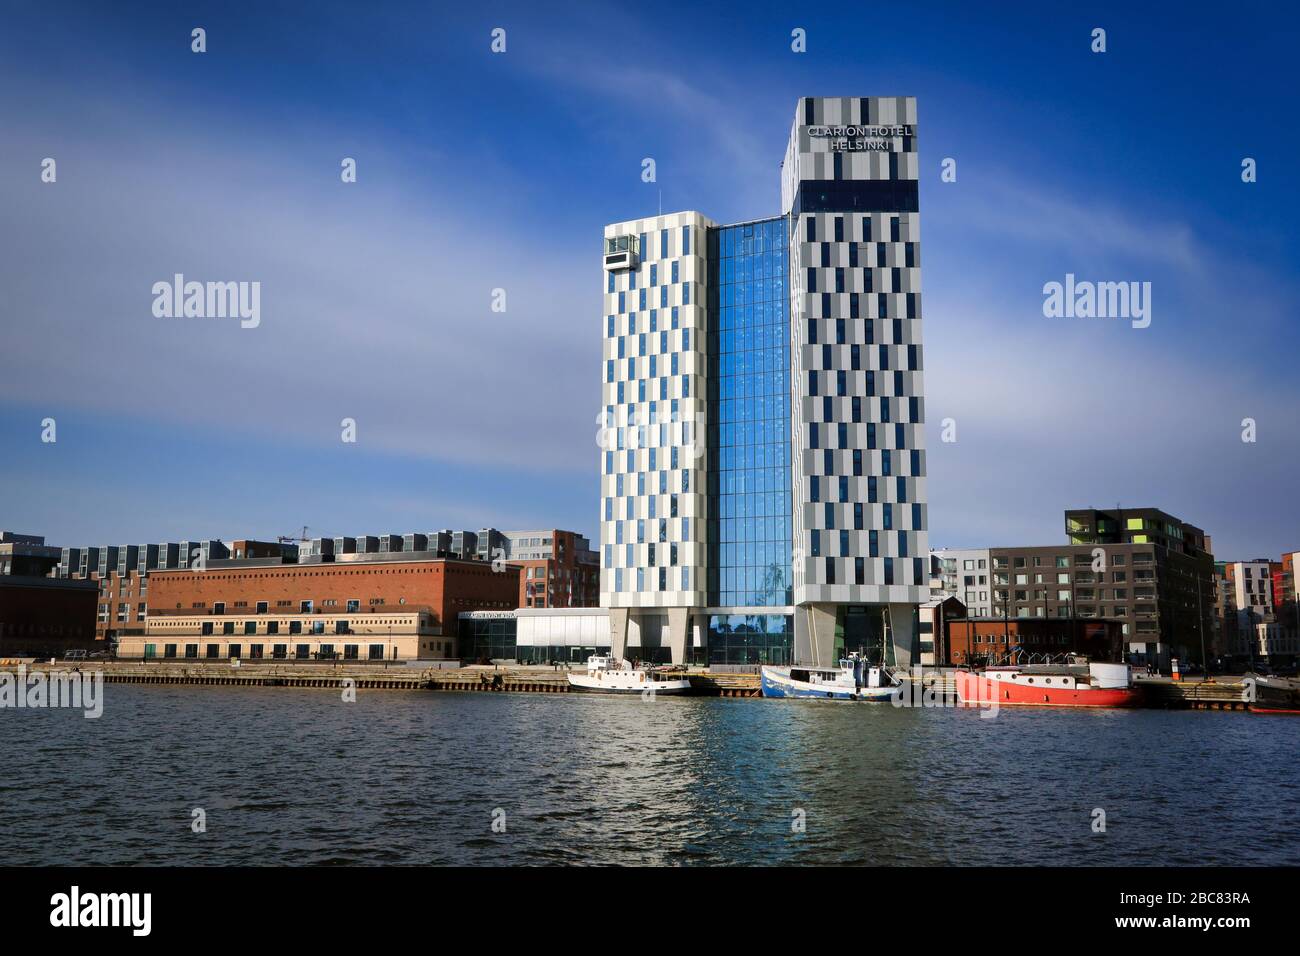 View of Hietalahti seafront with Clarion Hotel and city buildings on a sunny day. Helsinki, Finland. March 27, 2020. Stock Photo